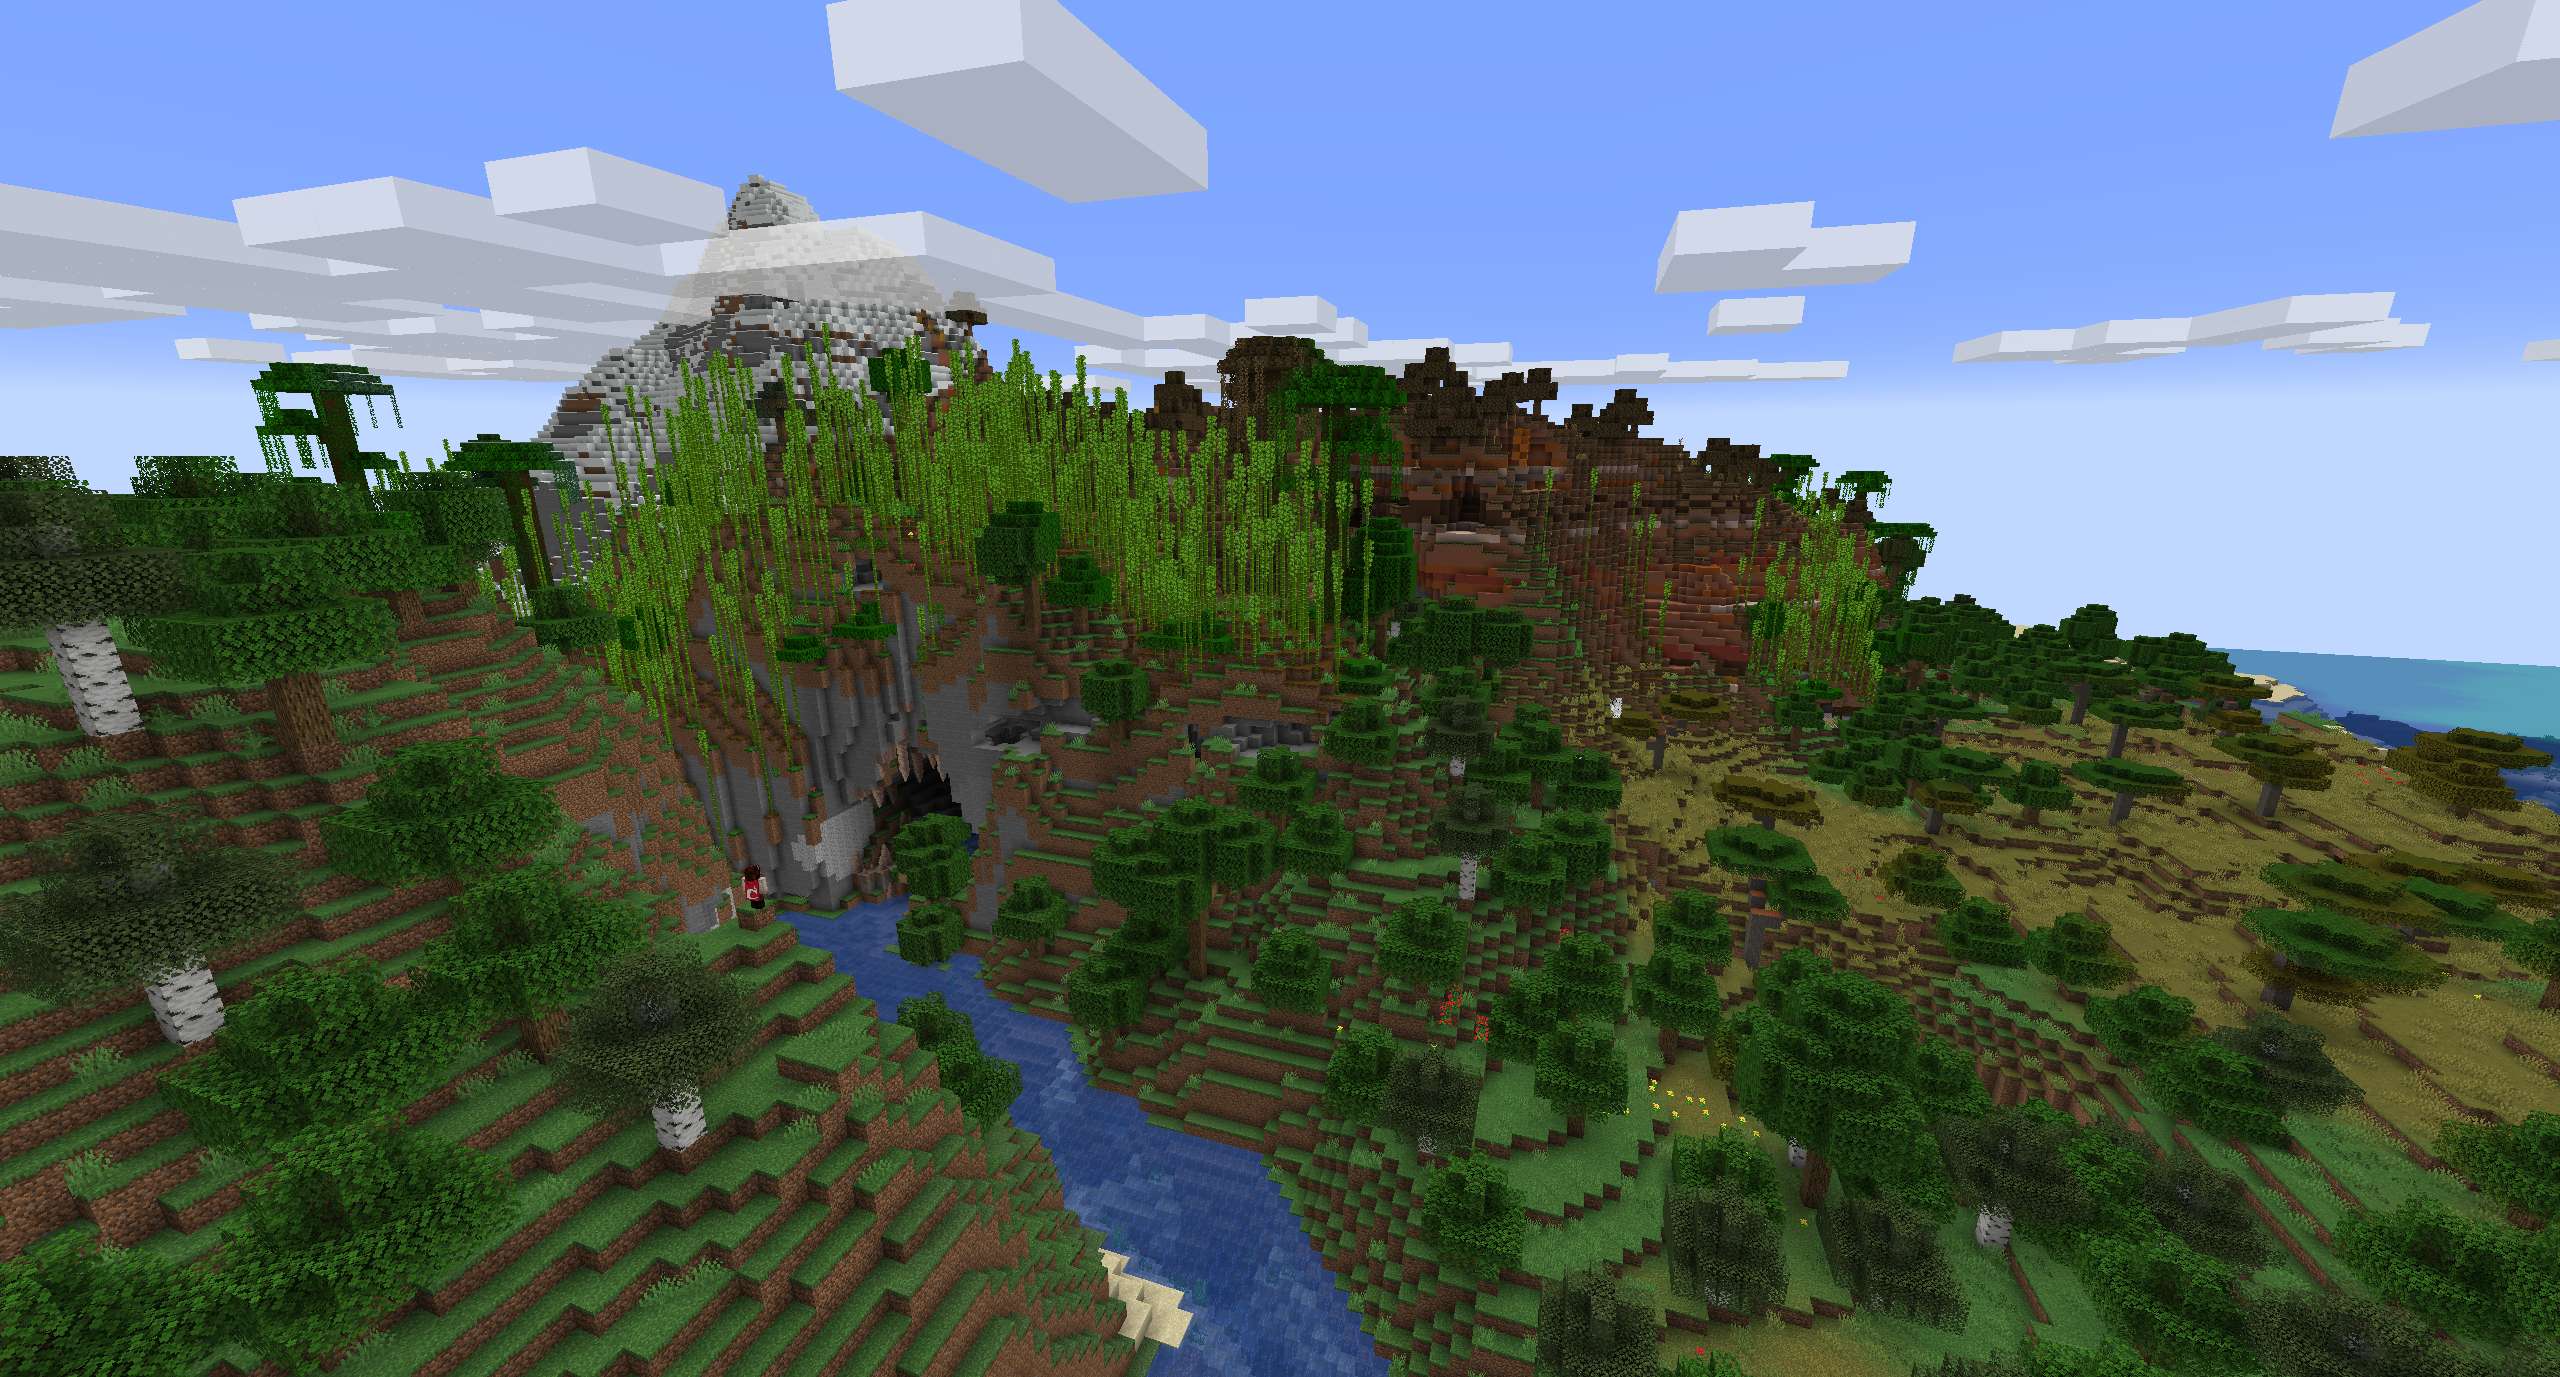 Minecraft Snapshot 1.18 Shows Off Stunning New Terrain Generation Expected With Caves & Cliffs Part 2